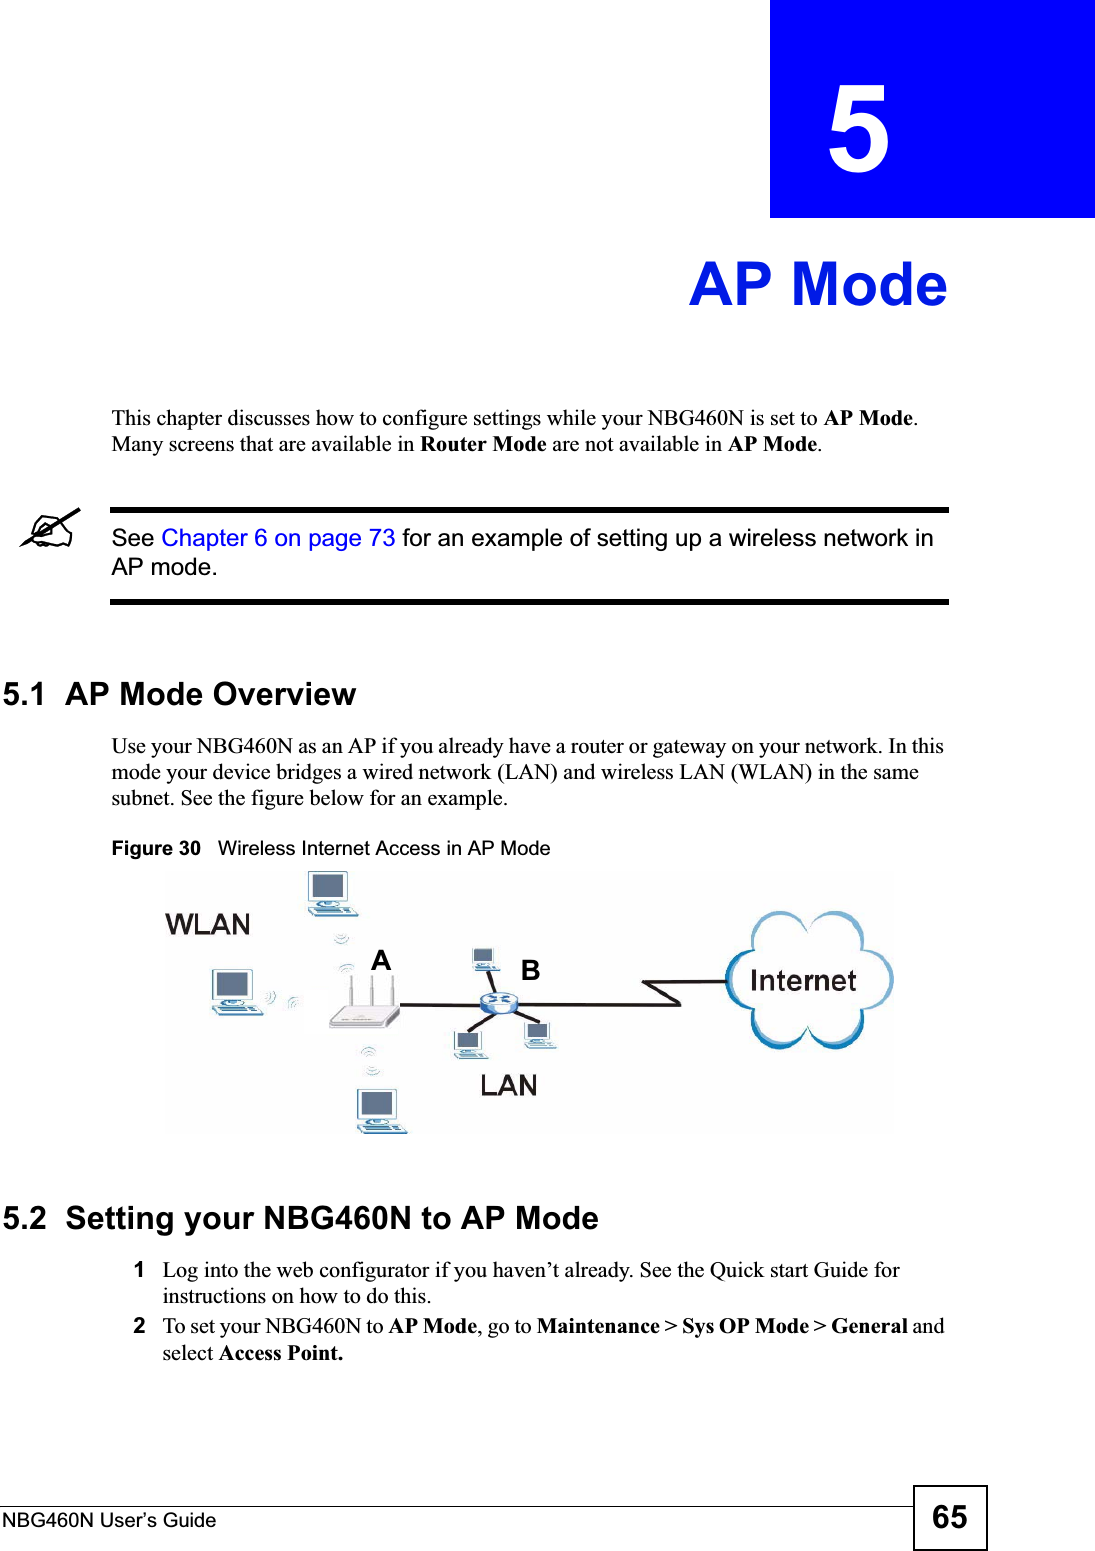 NBG460N User’s Guide 65CHAPTER  5 AP ModeThis chapter discusses how to configure settings while your NBG460N is set to AP Mode.Many screens that are available in Router Mode are not available in AP Mode.&quot;See Chapter 6 on page 73 for an example of setting up a wireless network in AP mode. 5.1  AP Mode OverviewUse your NBG460N as an AP if you already have a router or gateway on your network. In this mode your device bridges a wired network (LAN) and wireless LAN (WLAN) in the same subnet. See the figure below for an example.Figure 30   Wireless Internet Access in AP Mode 5.2  Setting your NBG460N to AP Mode1Log into the web configurator if you haven’t already. See the Quick start Guide for instructions on how to do this.2To set your NBG460N to AP Mode, go to Maintenance &gt; Sys OP Mode &gt; General andselect Access Point.AB